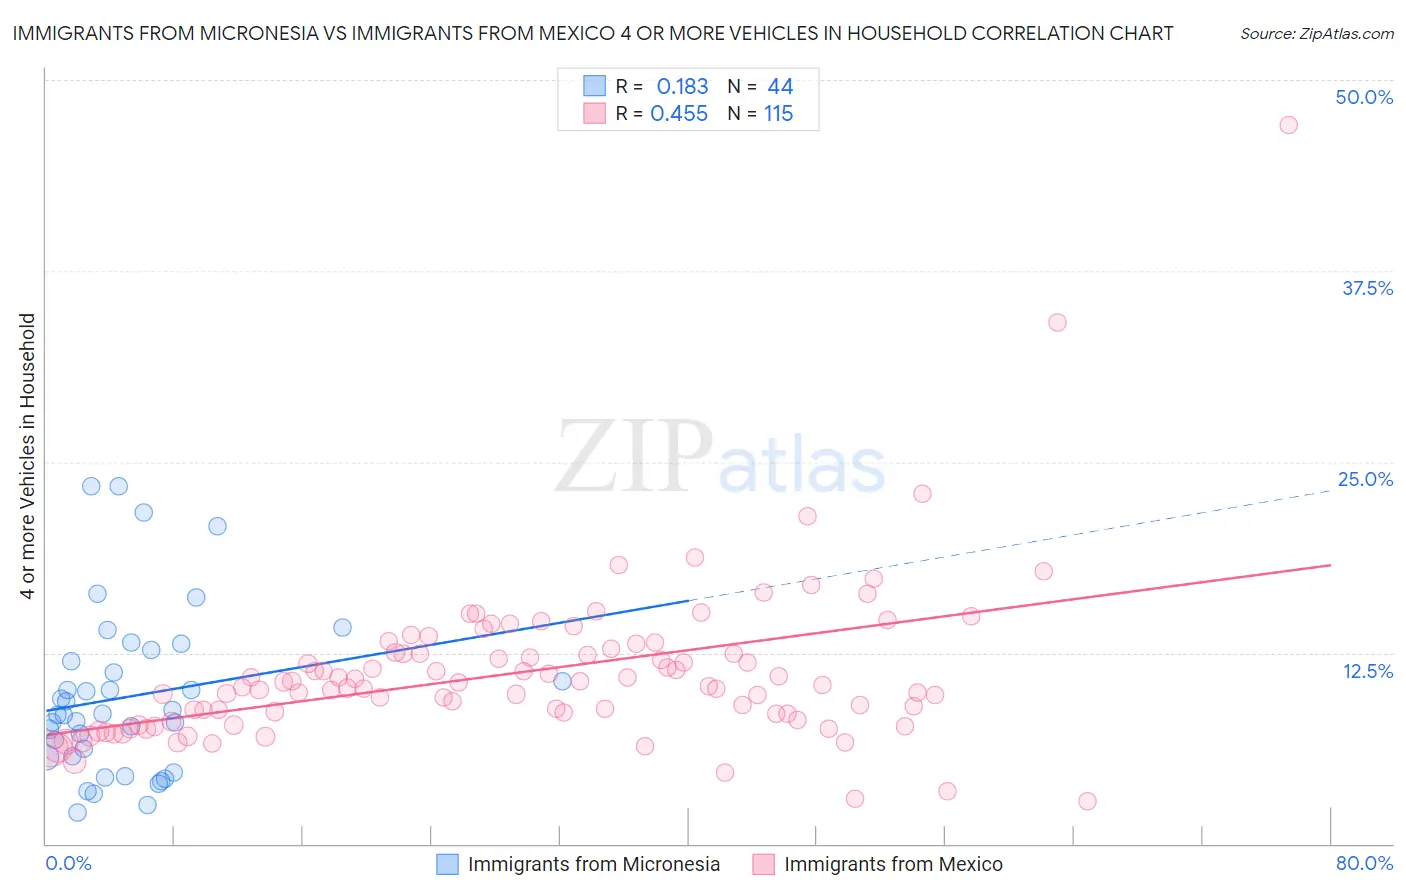 Immigrants from Micronesia vs Immigrants from Mexico 4 or more Vehicles in Household